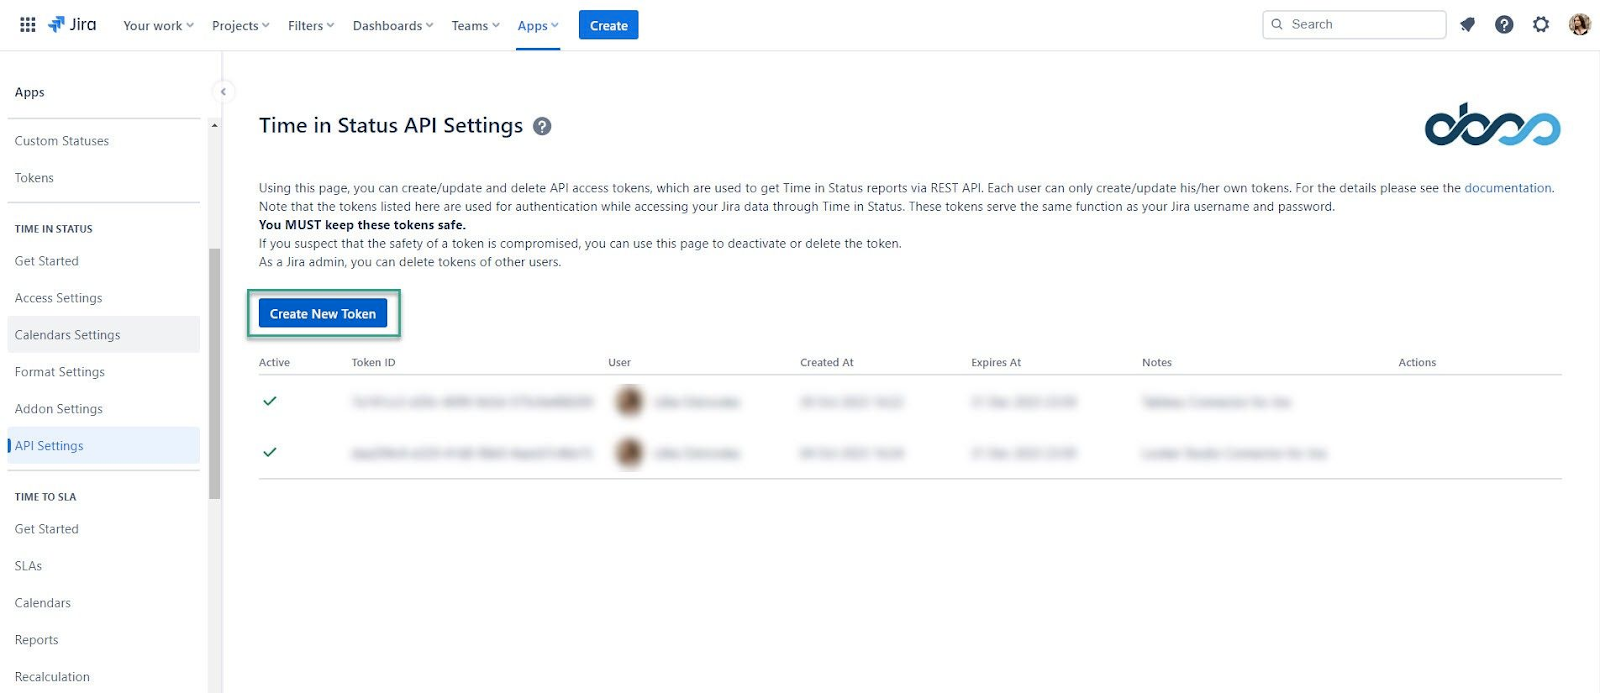 Analyzing and Exporting Data from Jira Apps made Easy - Create New Token button